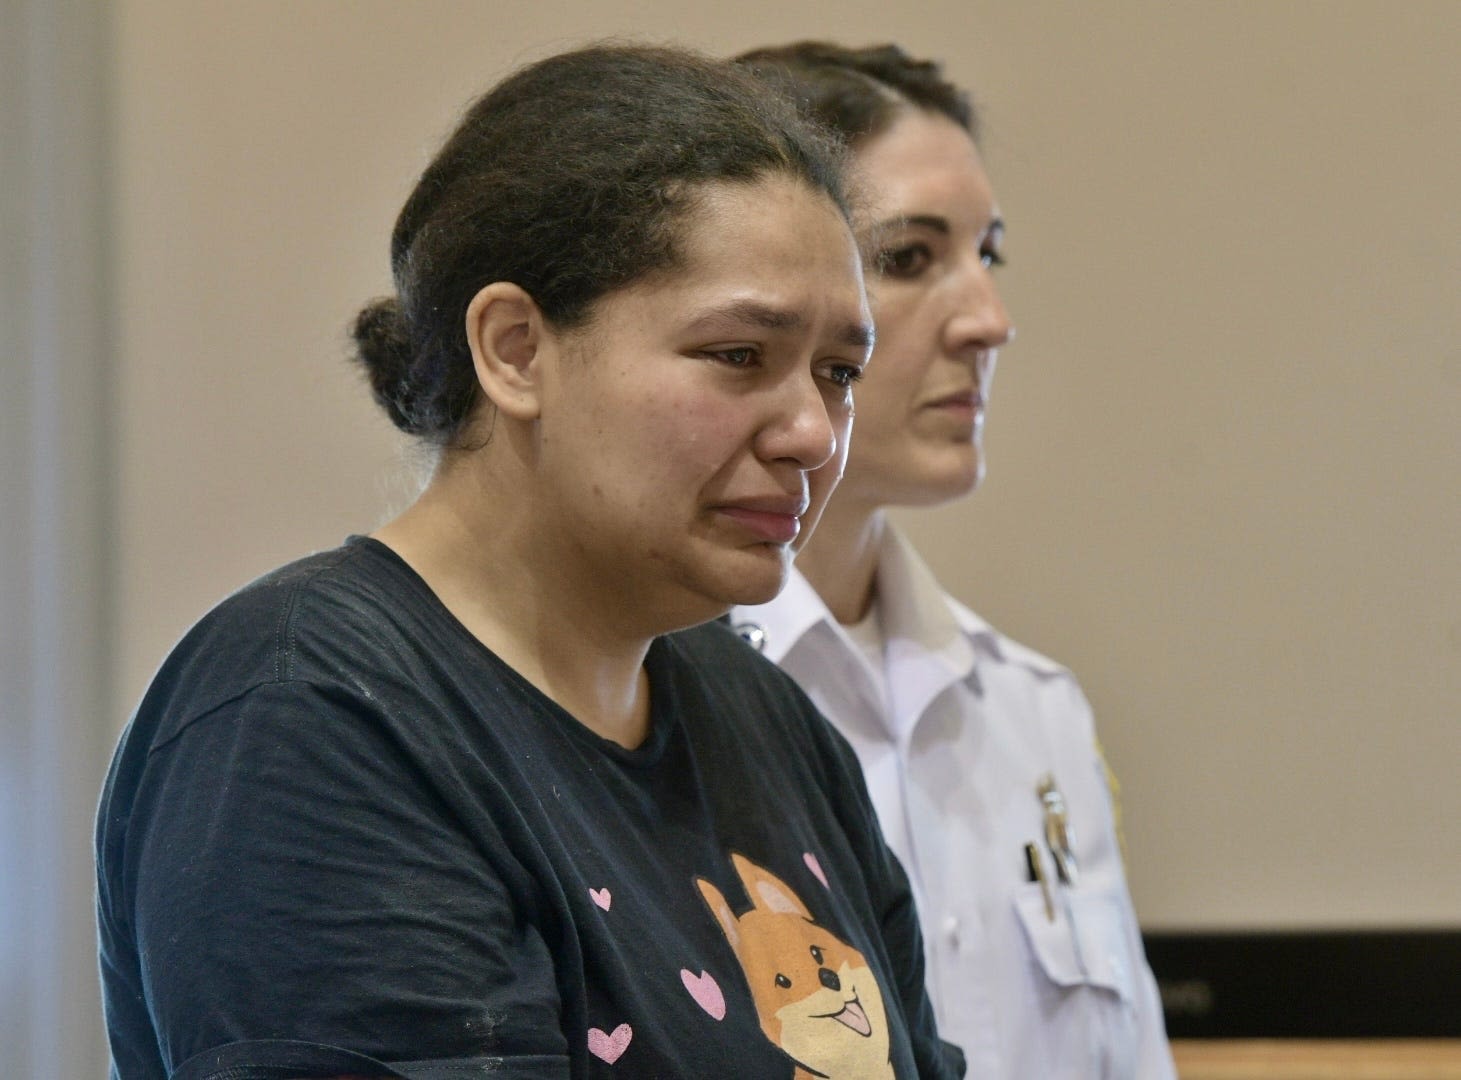 Leominster woman accused of fatally shooting boyfriend in head after argument